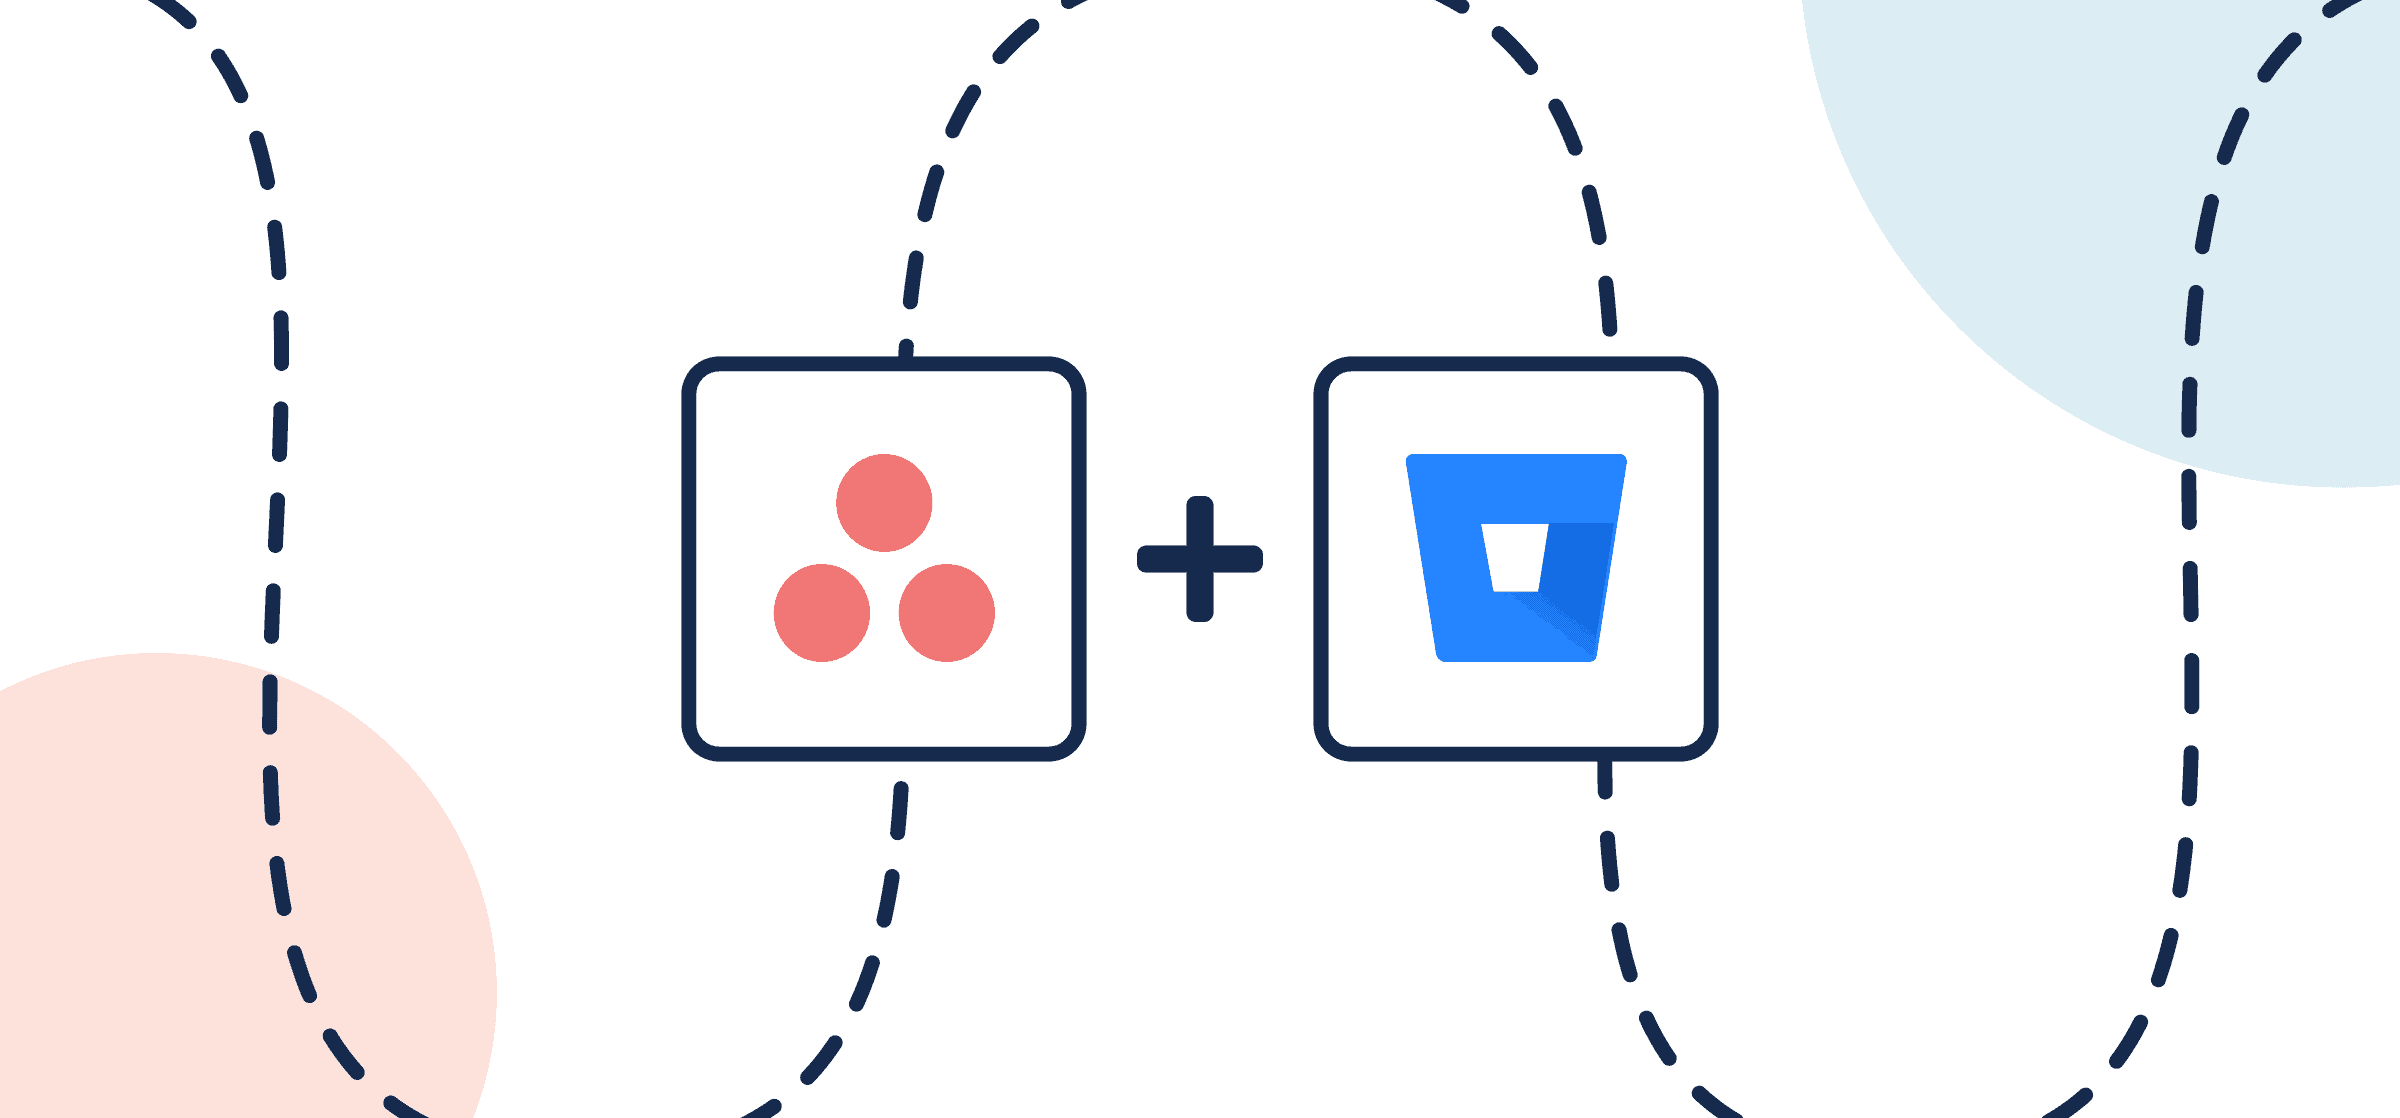 Featured image with Logos for Asana and Bitbucket, representing Unito's guide to syncing Bitbucket Issues to Asana tasks with a 2-way integration.